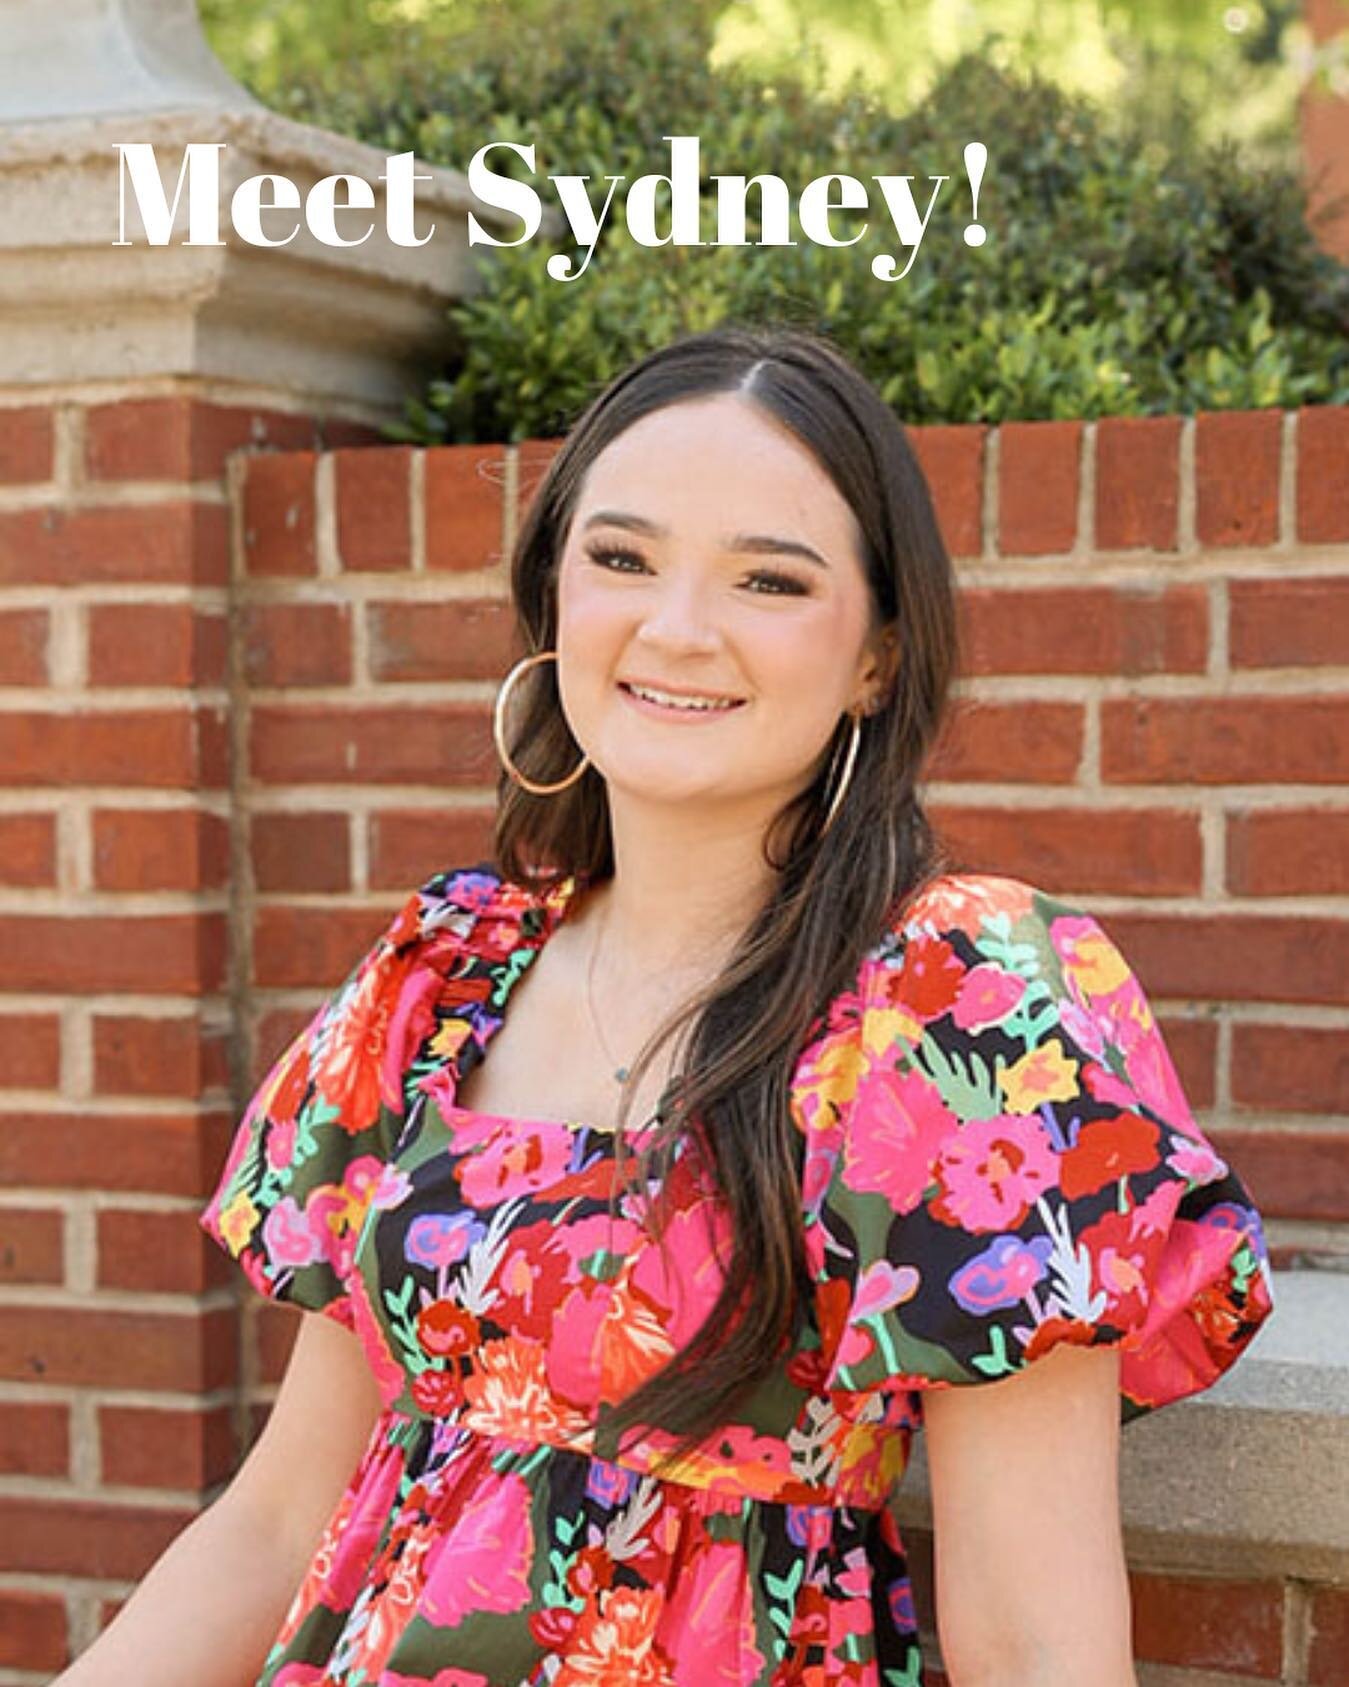 Happy Tuesday! We&rsquo;ve got a new face in our space! Meet Sydney! She&rsquo;s new to the Indigo team and we are so glad to have her!
@sydney.creates is a detail-oriented artist, and recent Winthrop graduate!

We are so glad you&rsquo;re here Sydne